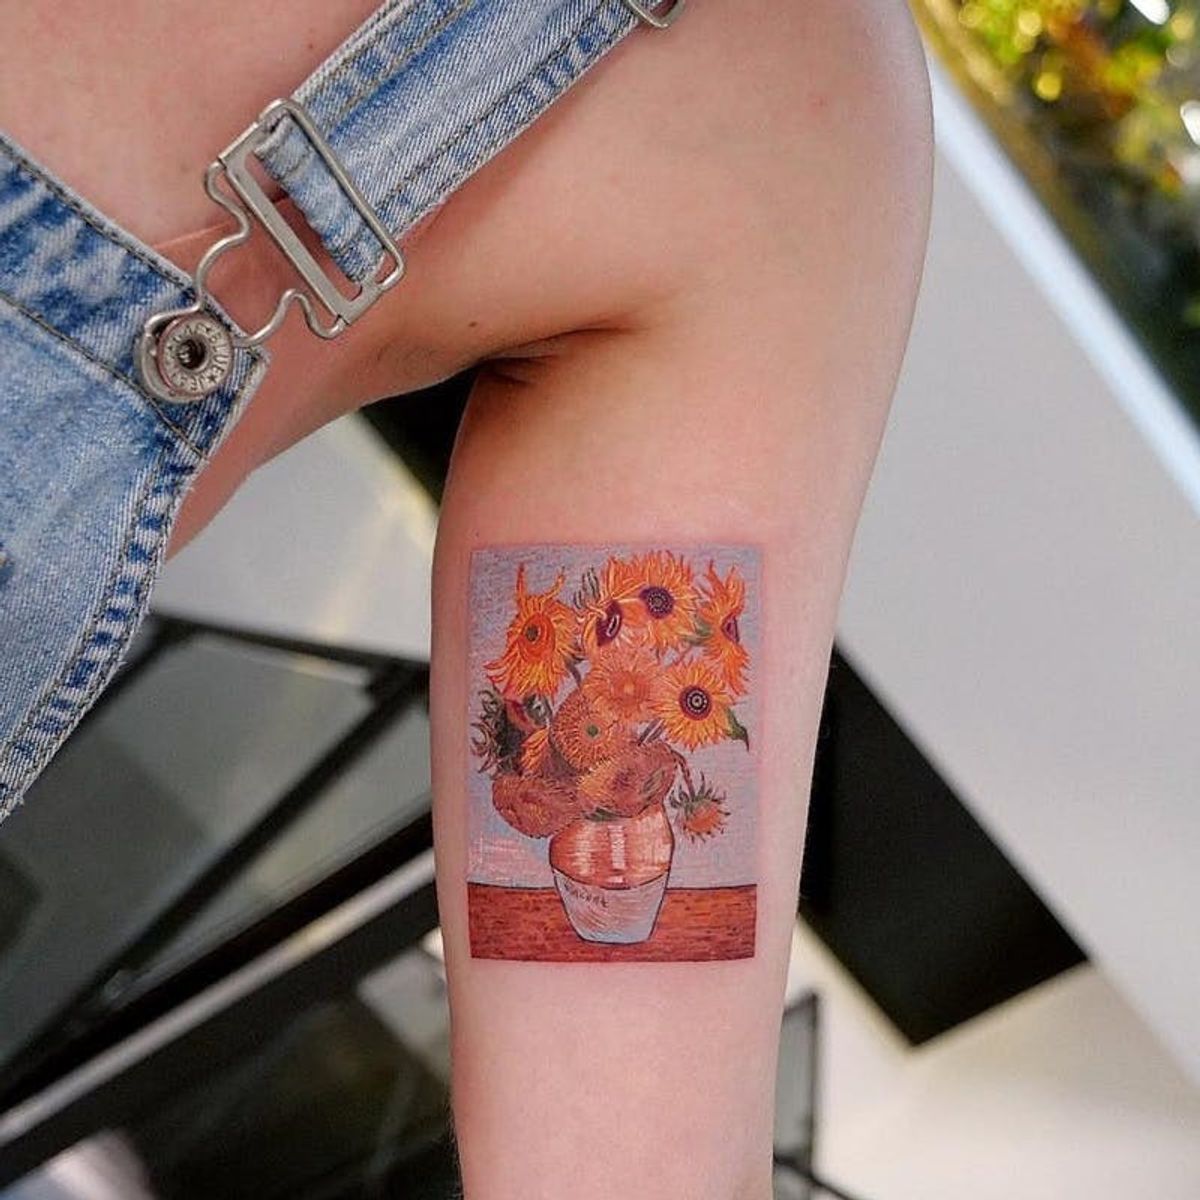 Meet the Tattoo Artist Who Recreates Famous Paintings With Ink